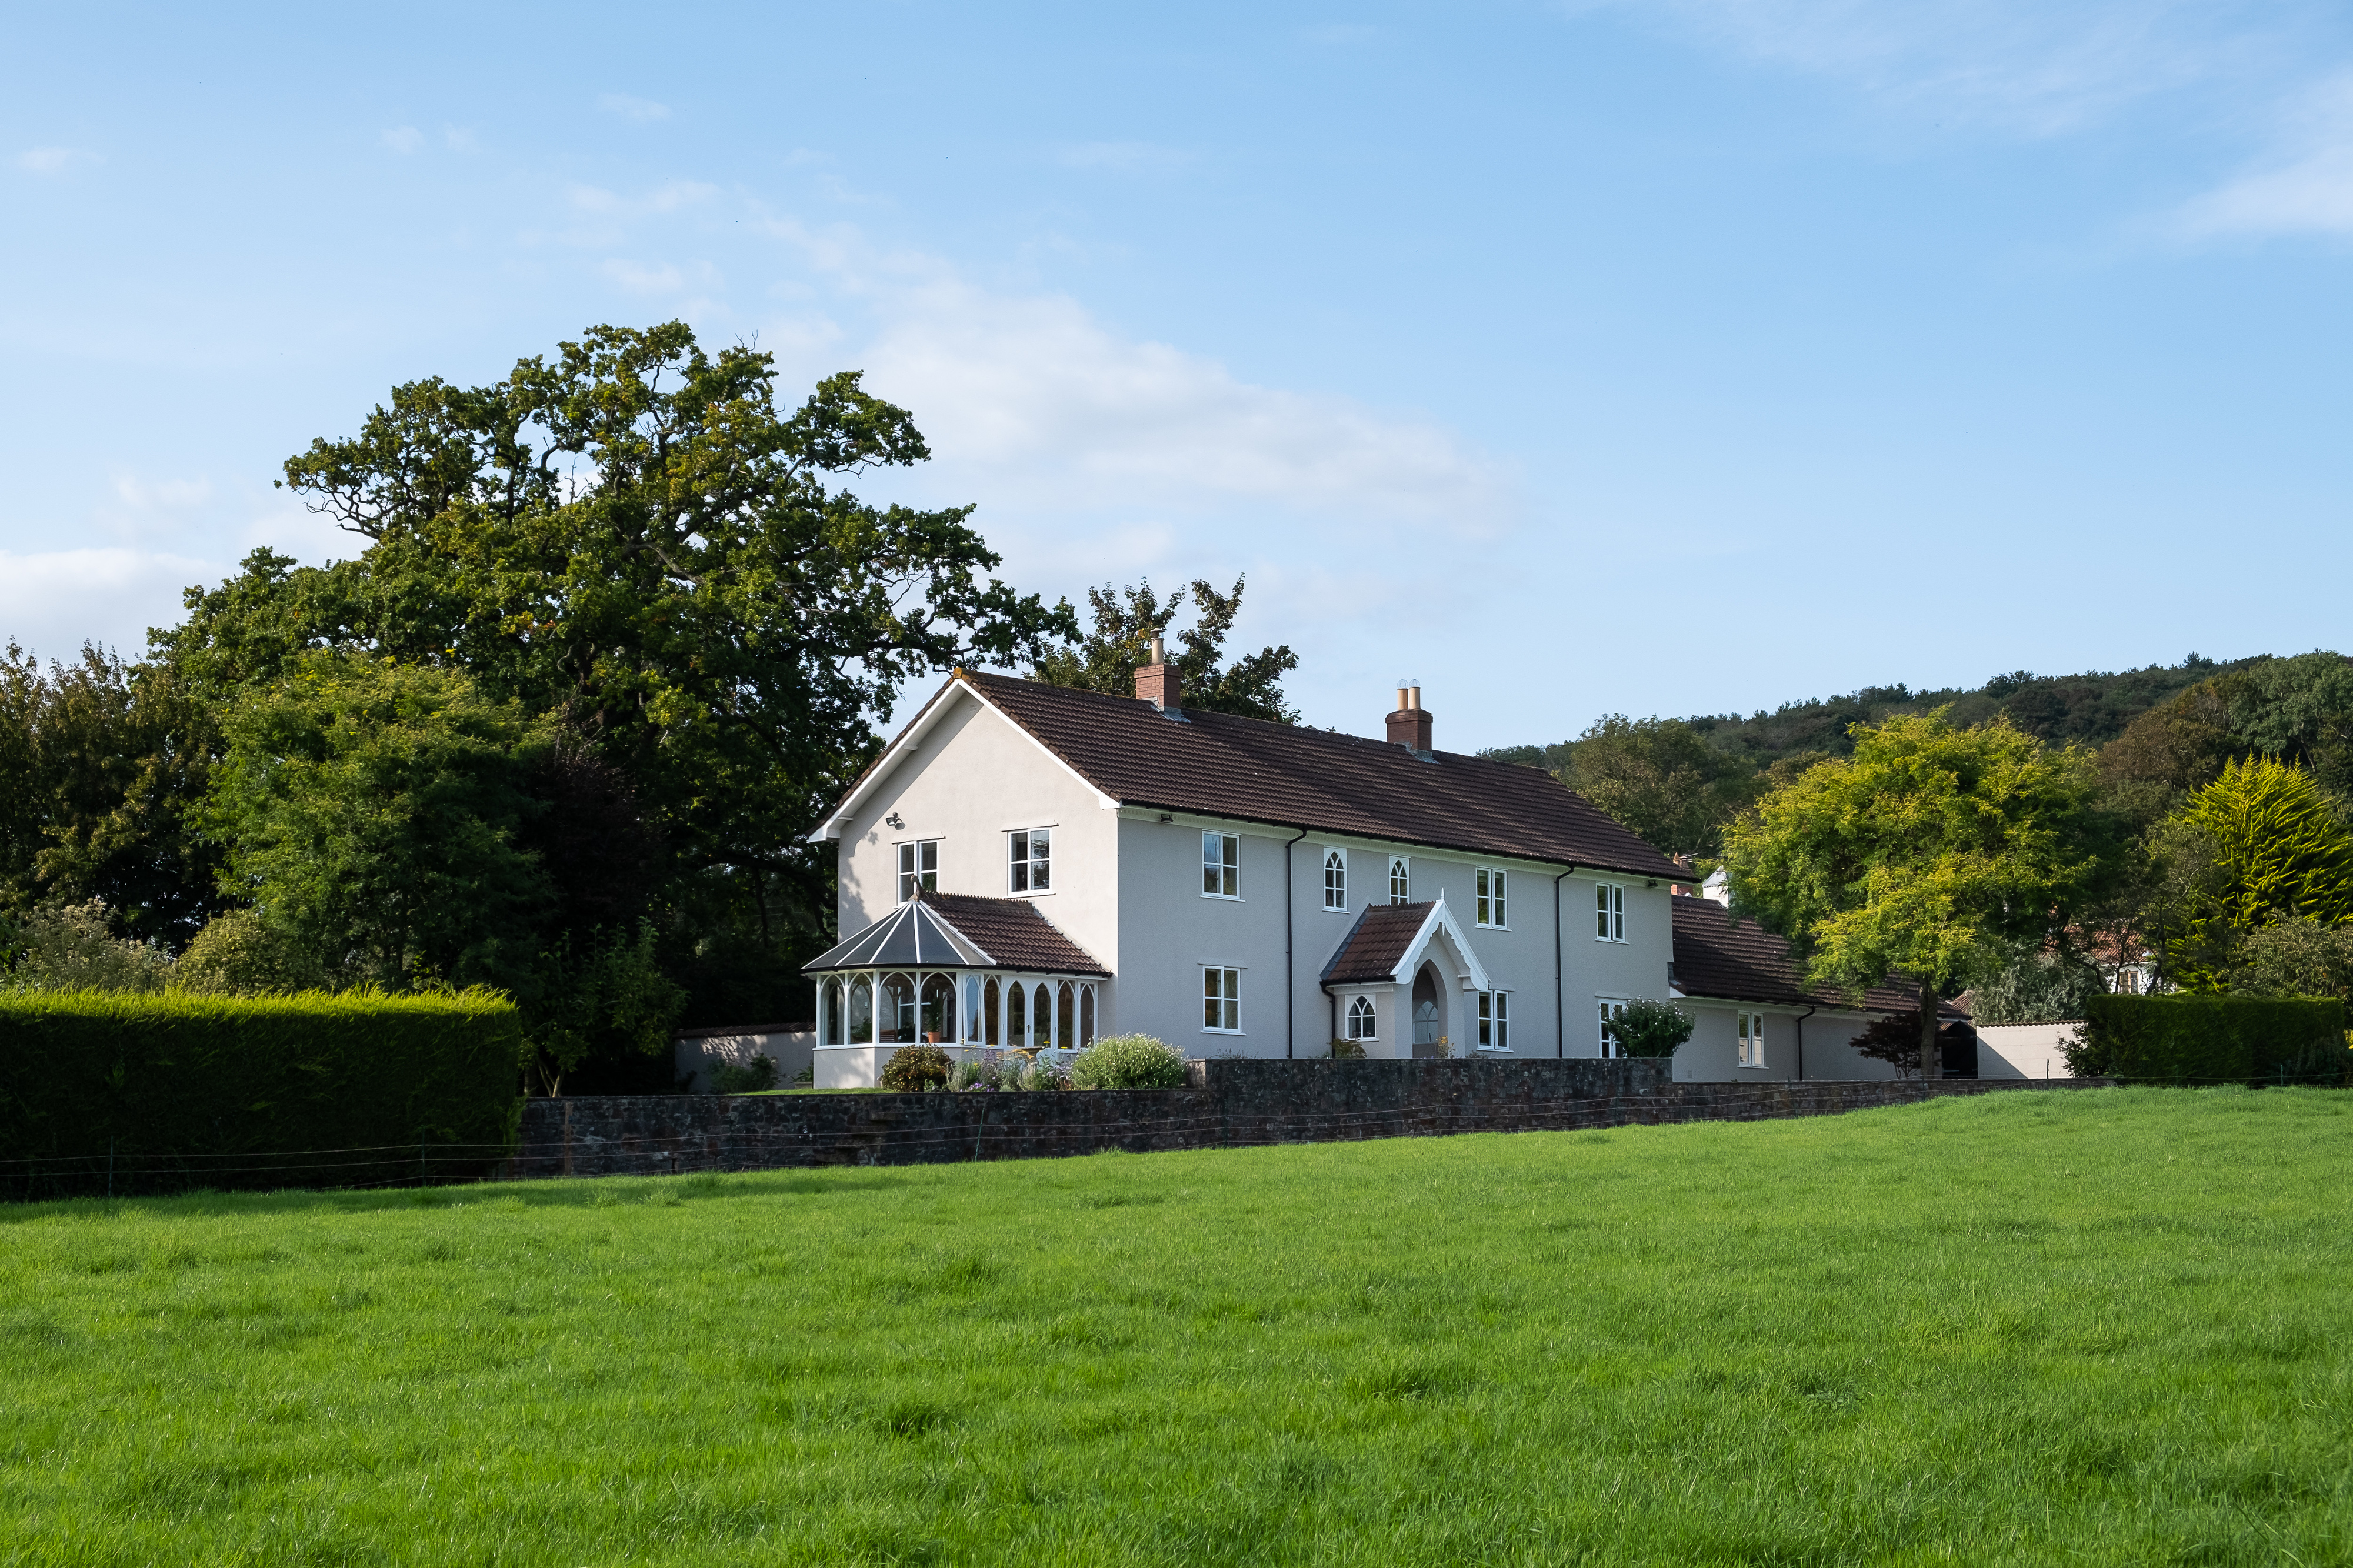 Country house with land, edge of Wrington village